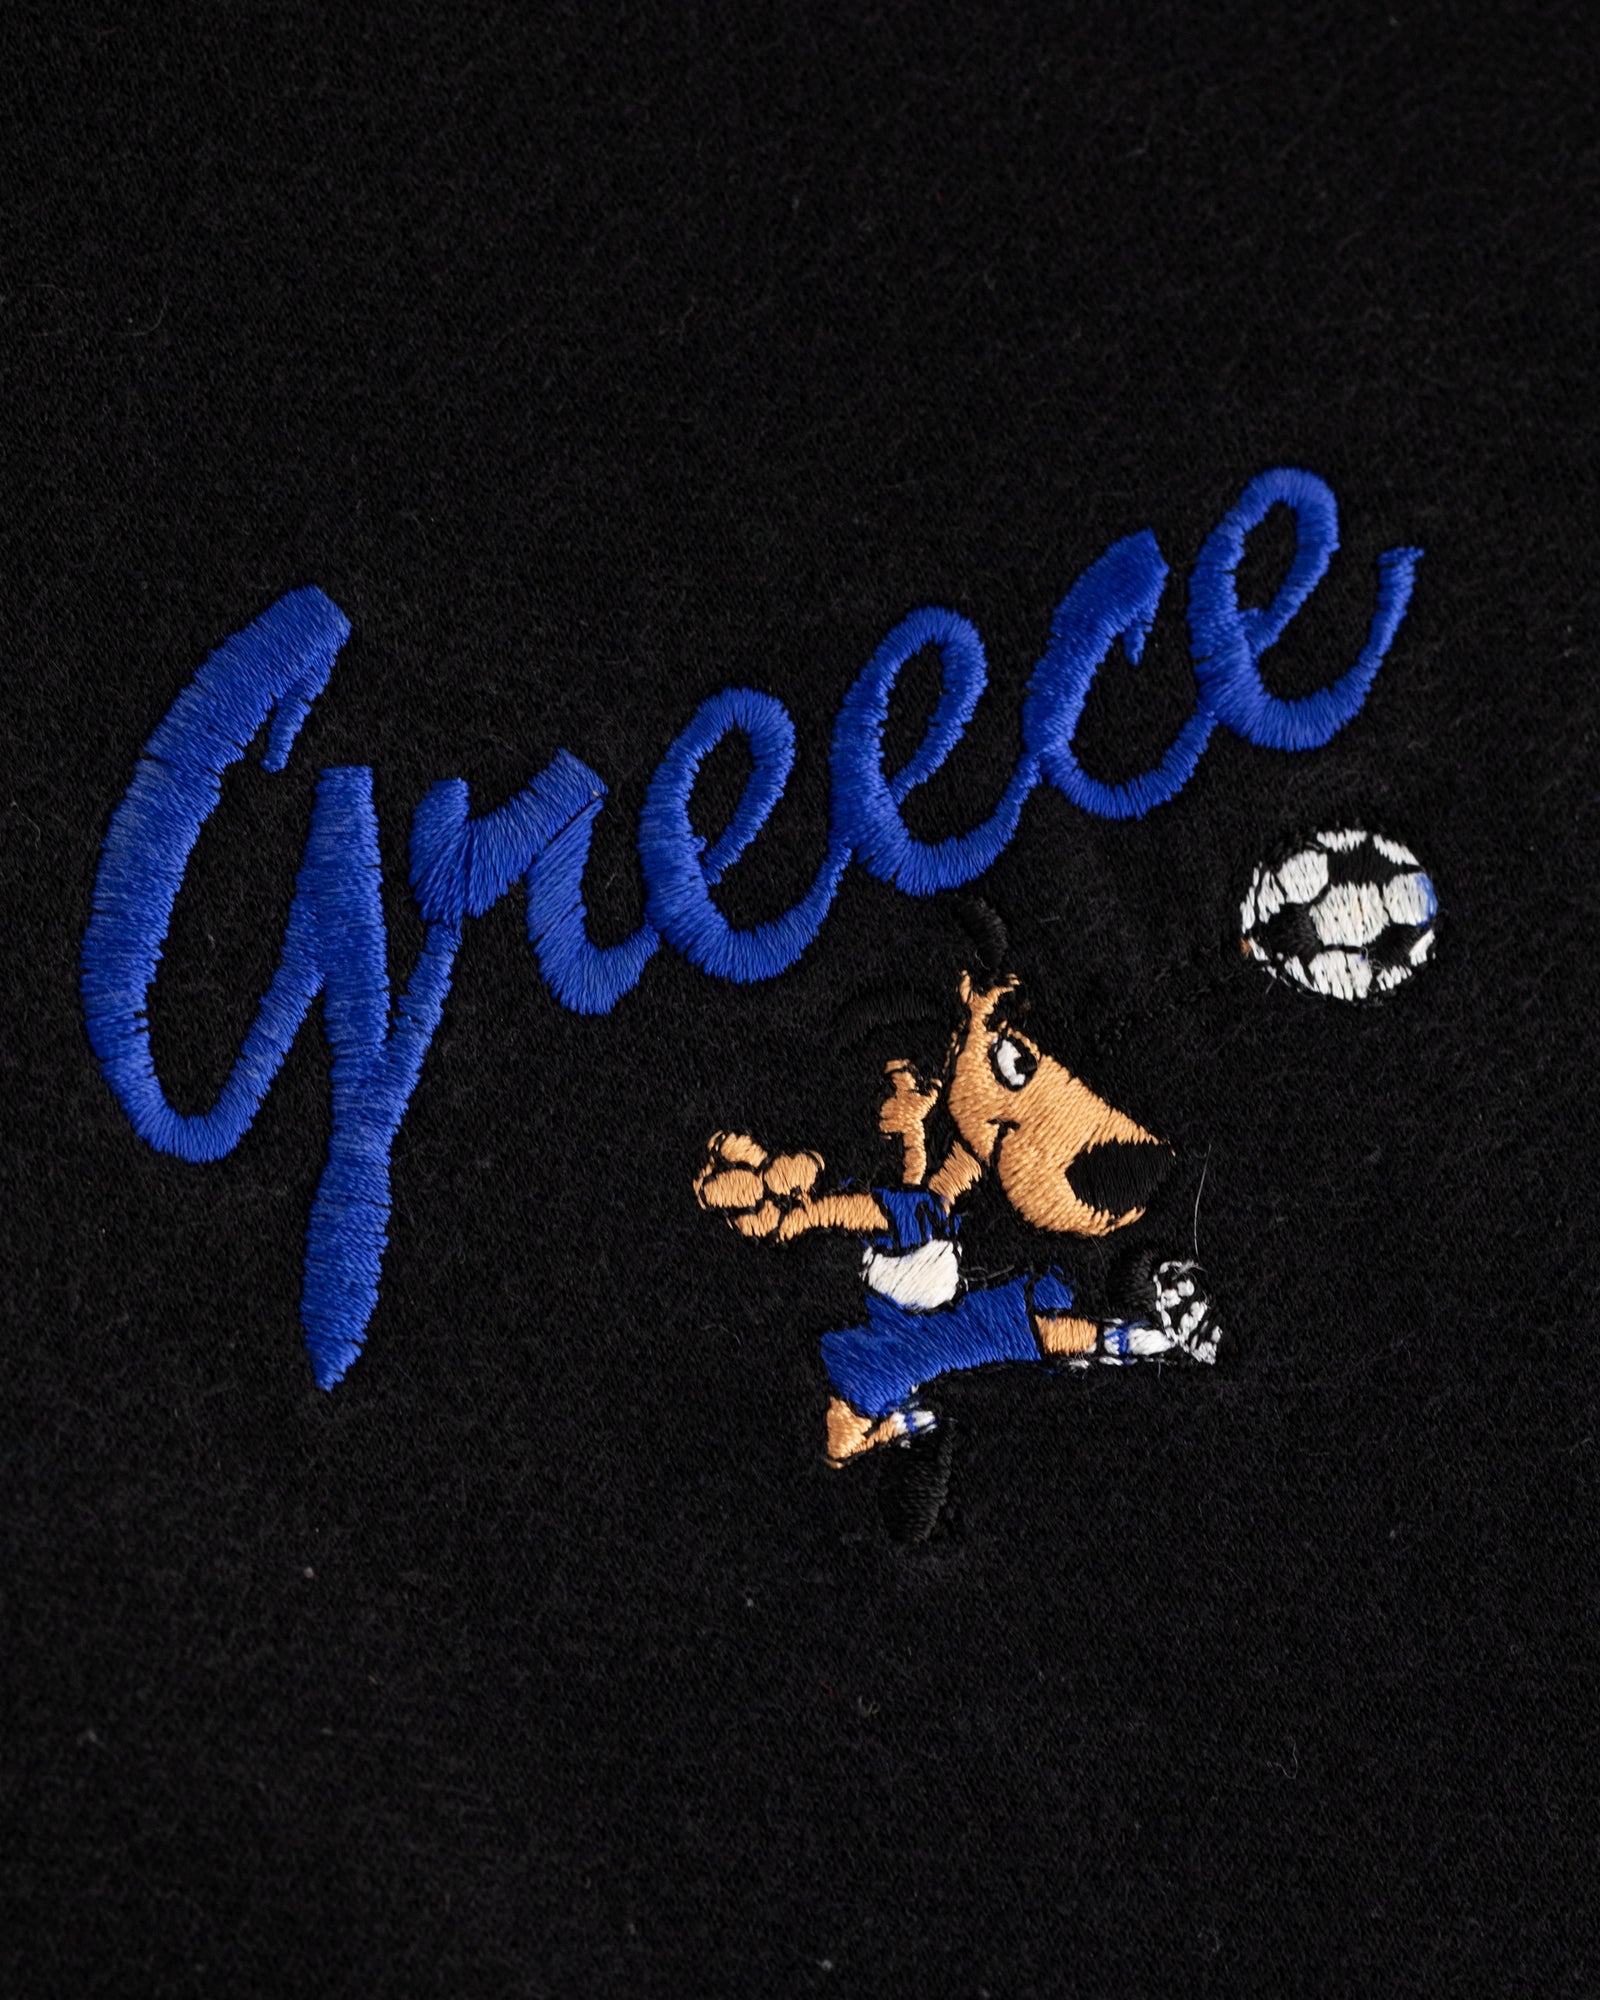 Vintage Greece 1994 World Cup Pullover